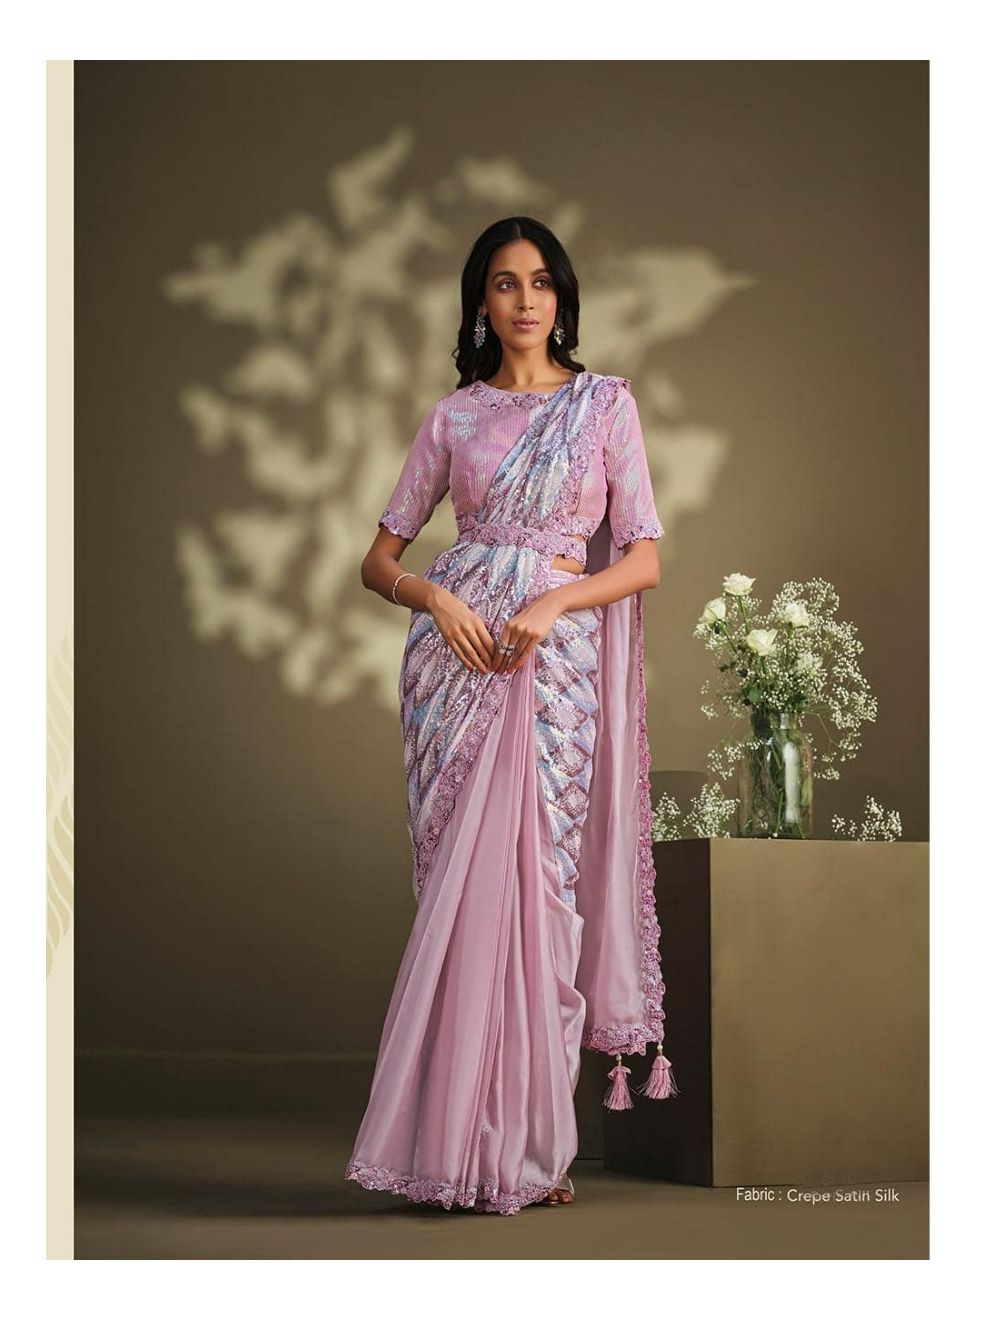 Ruffle - One Minute Saree, ready to wear saree for christmas – shakthistyles-sgquangbinhtourist.com.vn